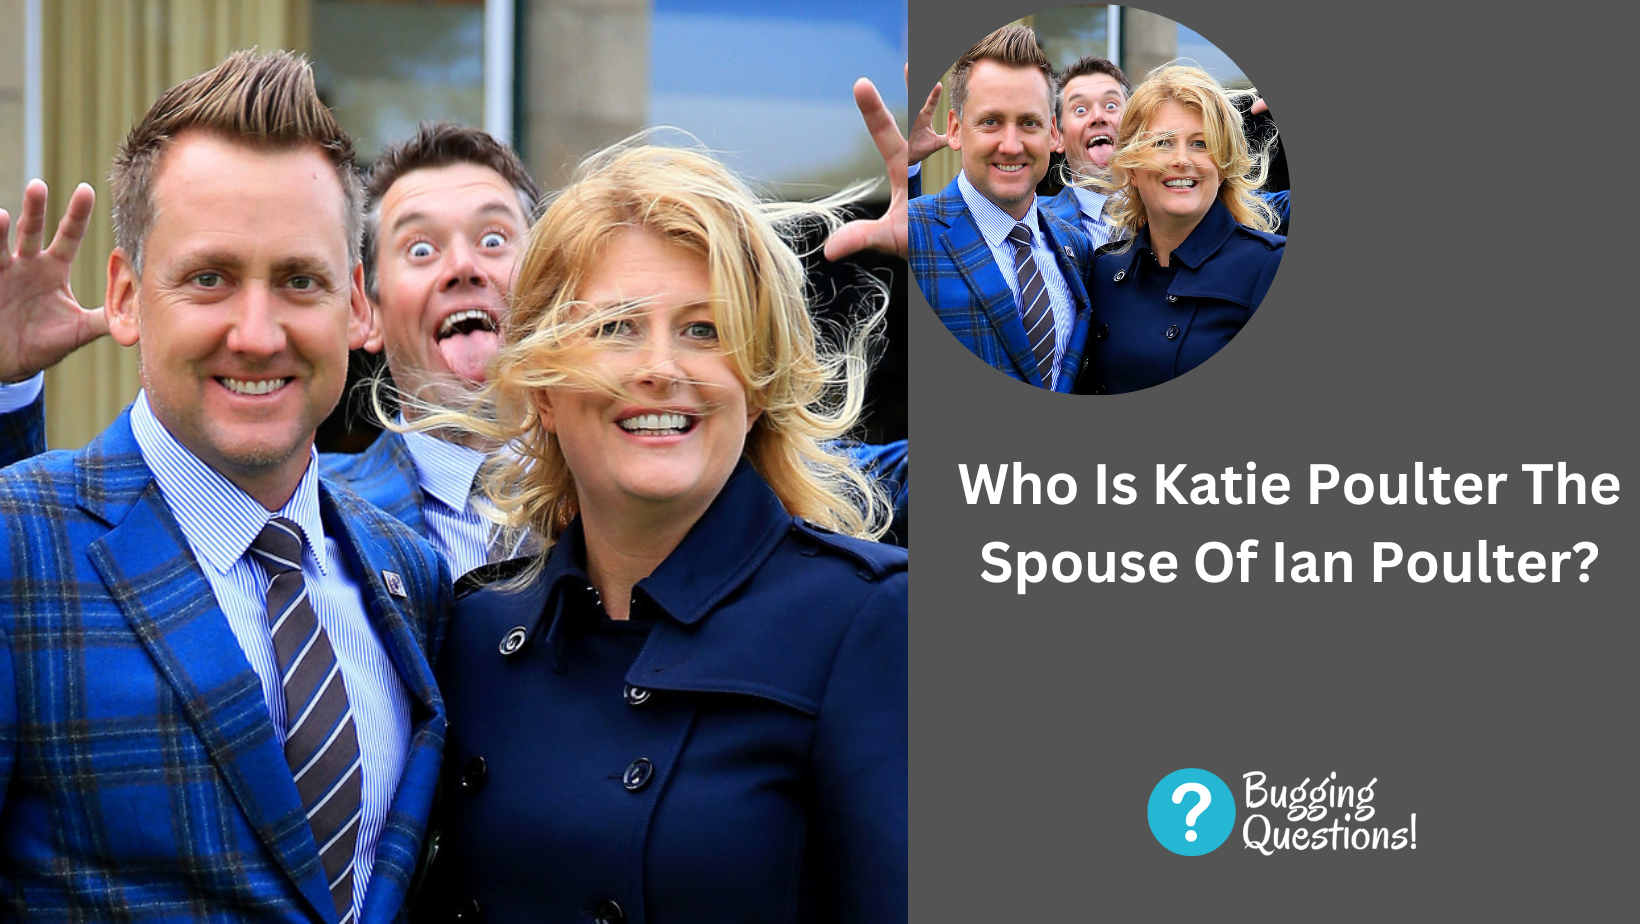 Who Is Katie Poulter The Spouse Of Ian Poulter?